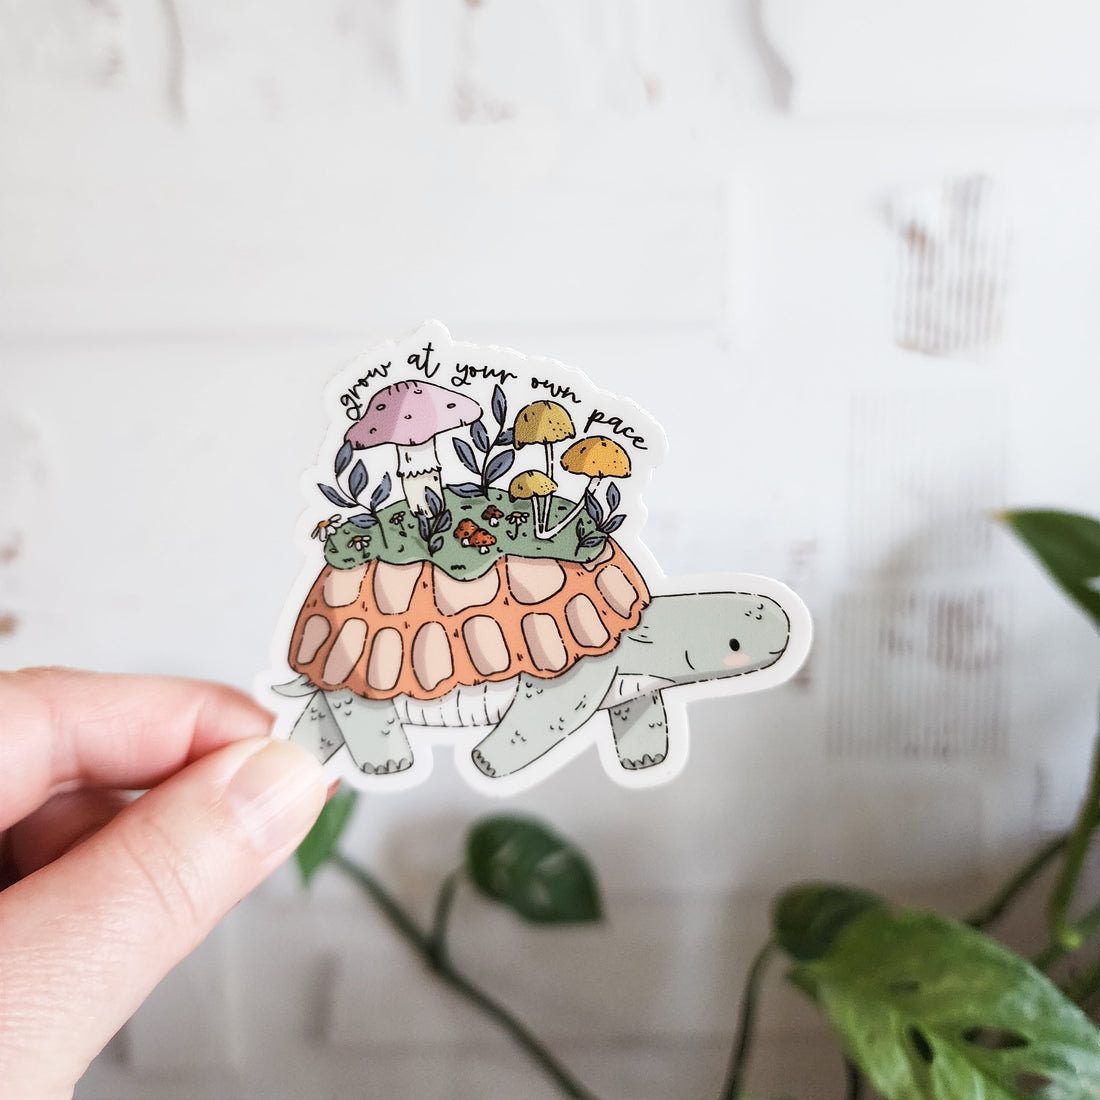 grow at your own pace turtle sticker held in a hand